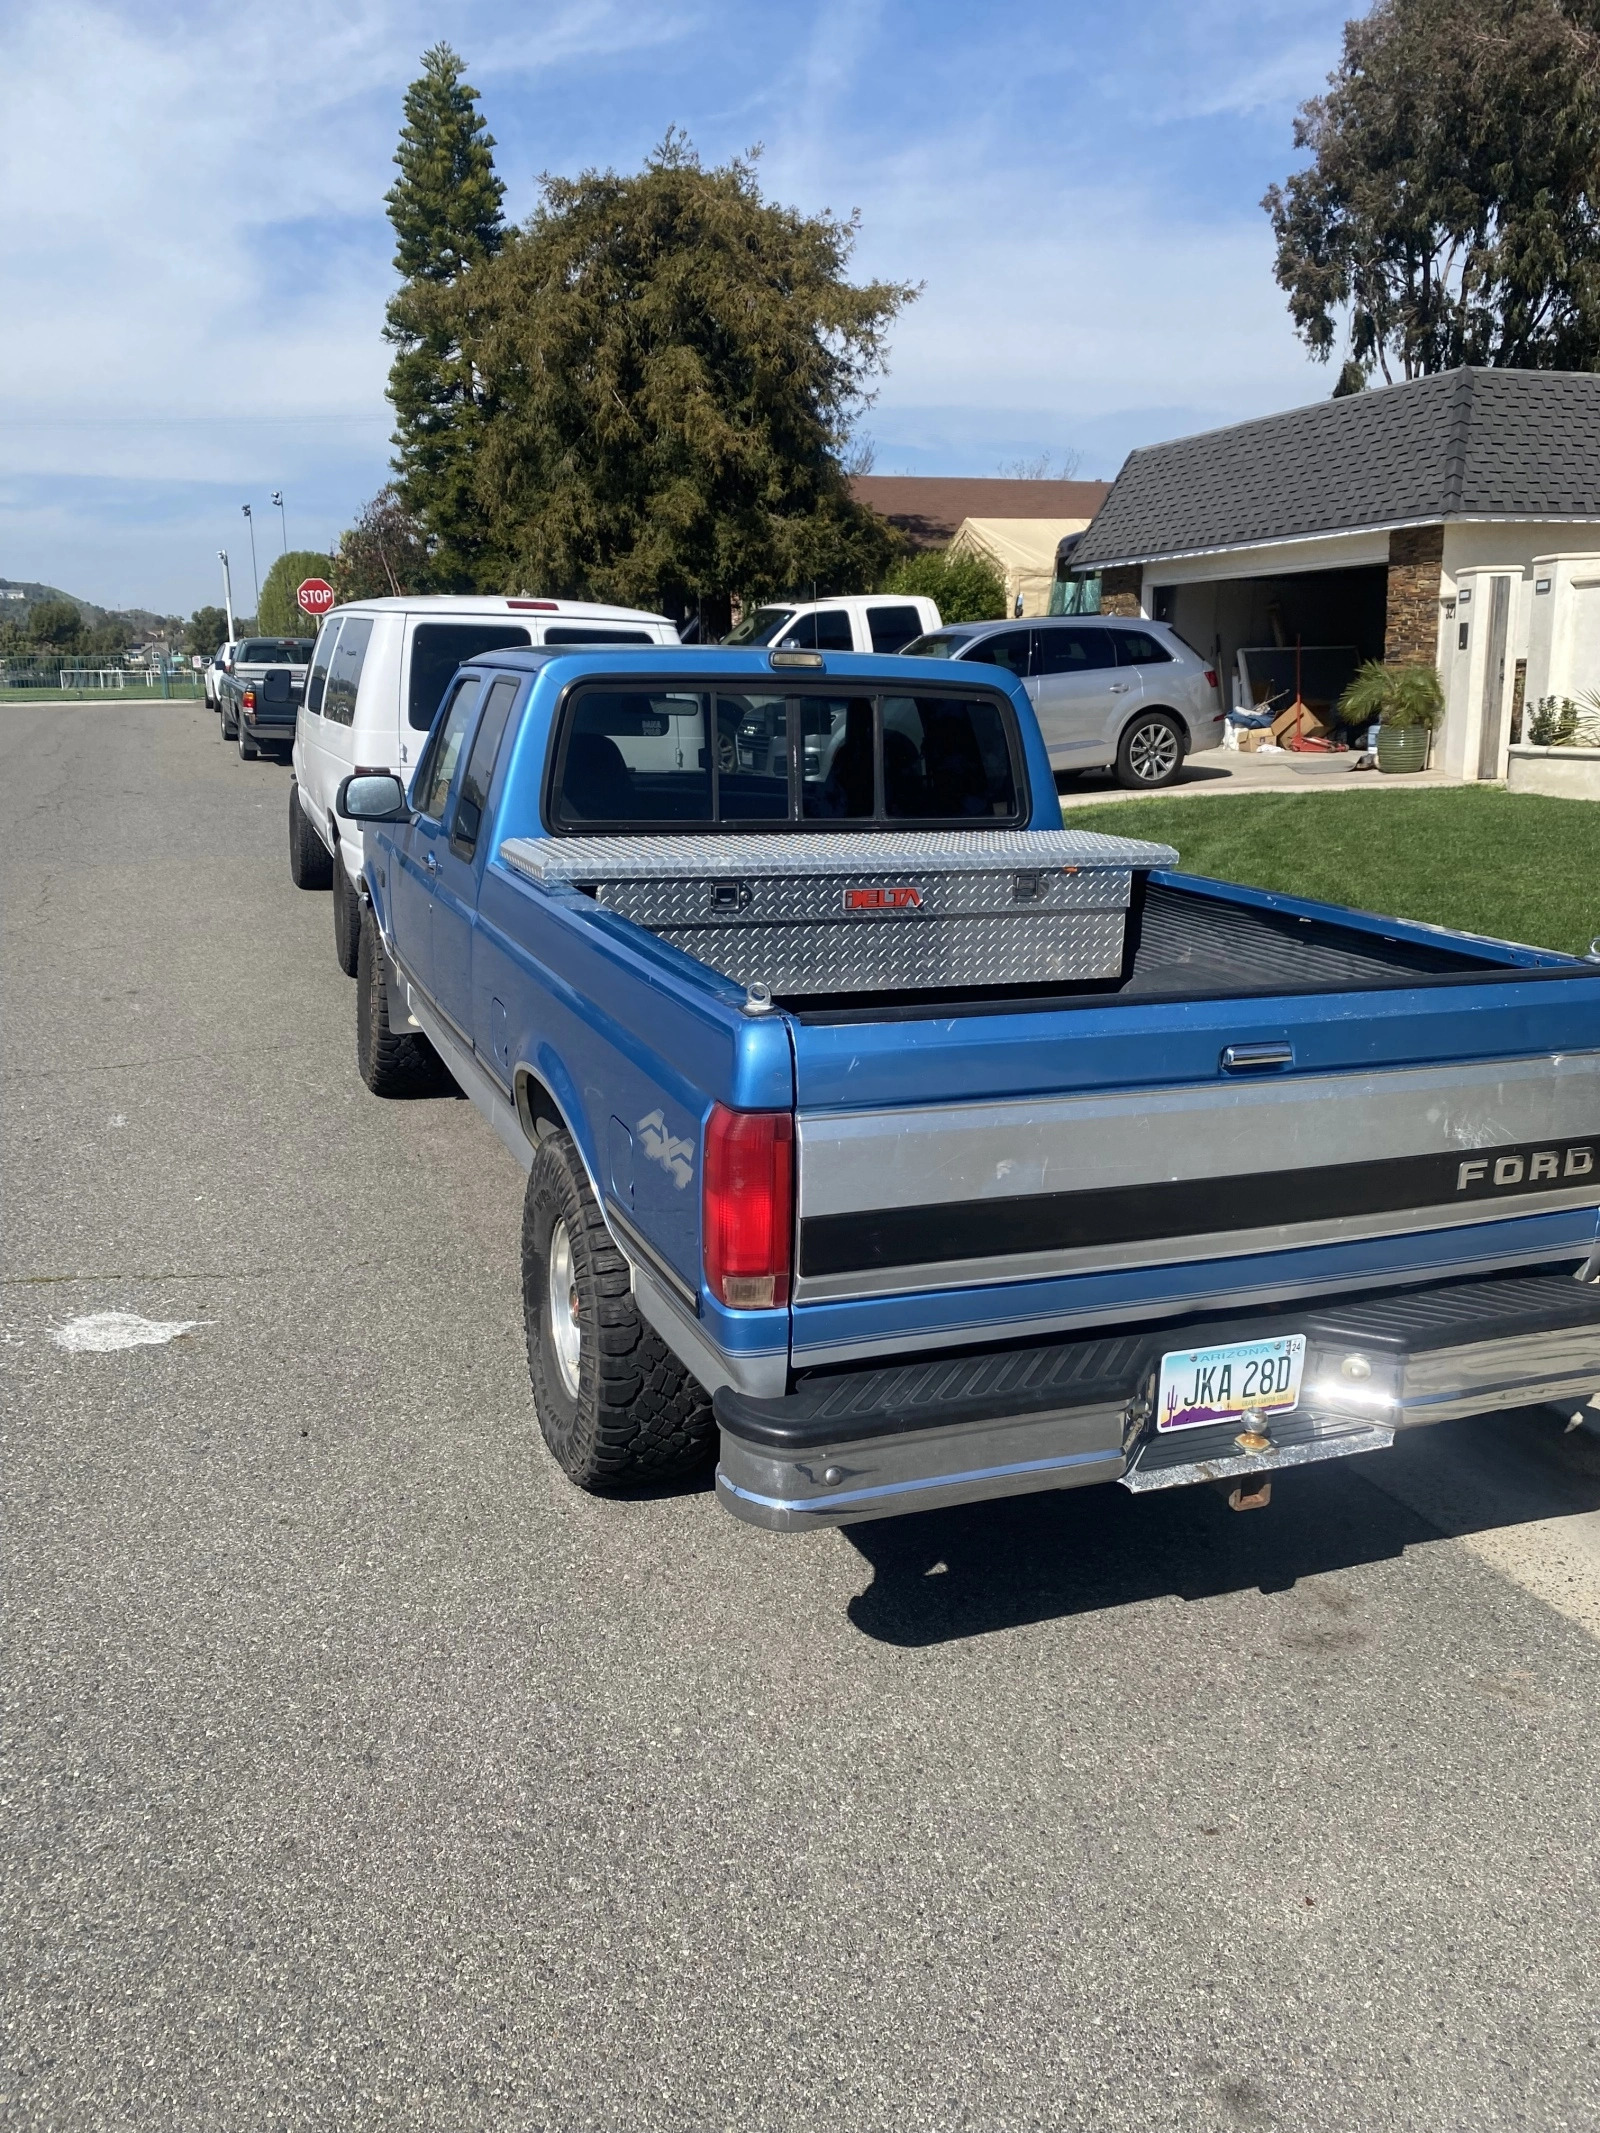 For Sale: 1992 Ford-150 extended cab 4x4 obs new motor good condition  - photo2